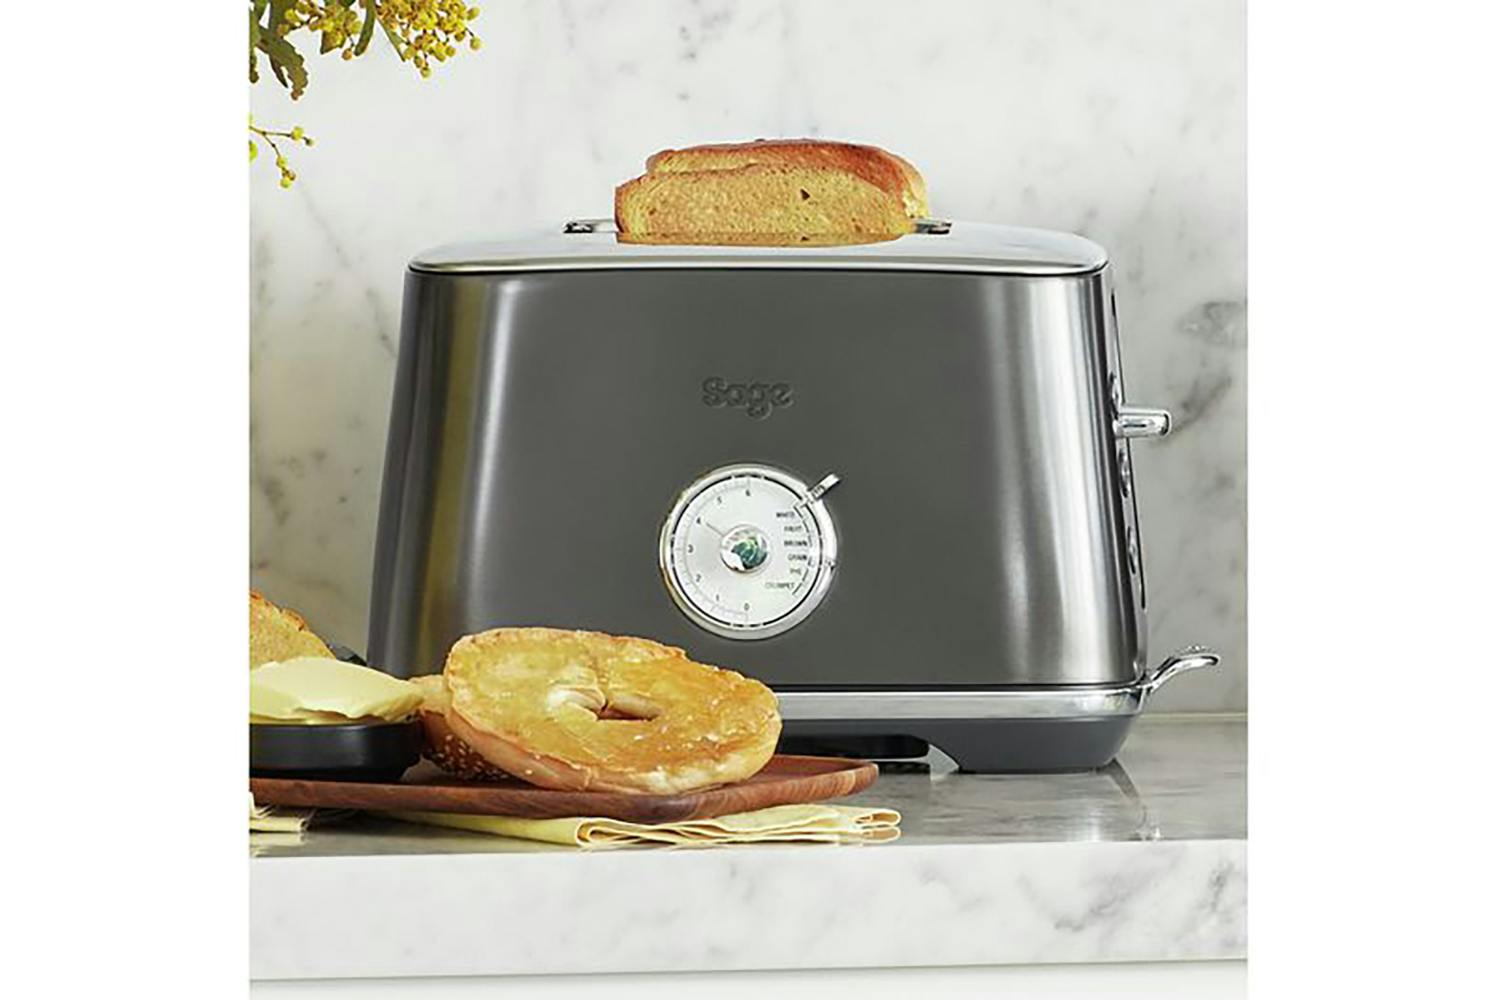 Sage The Toast Select Luxe 2 Slice Toaster | STA735BST4GUK1 | Black Stainless Steel